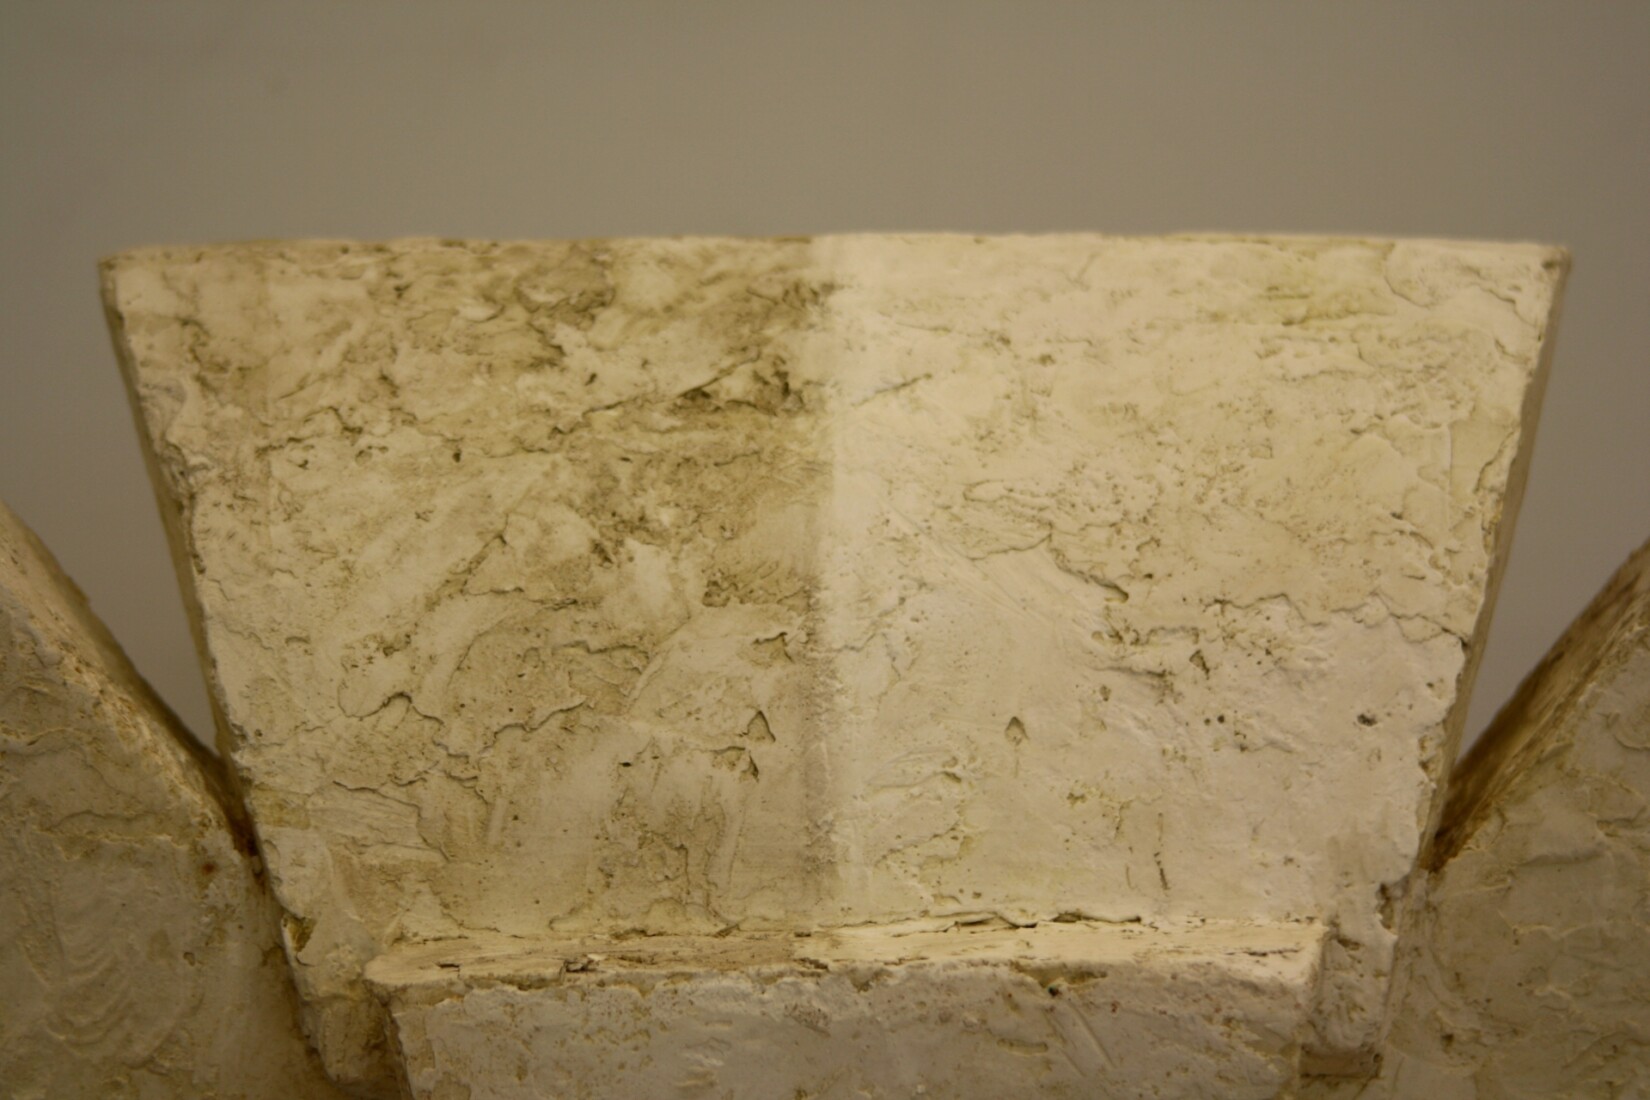 Plaster model during cleaning (detail)